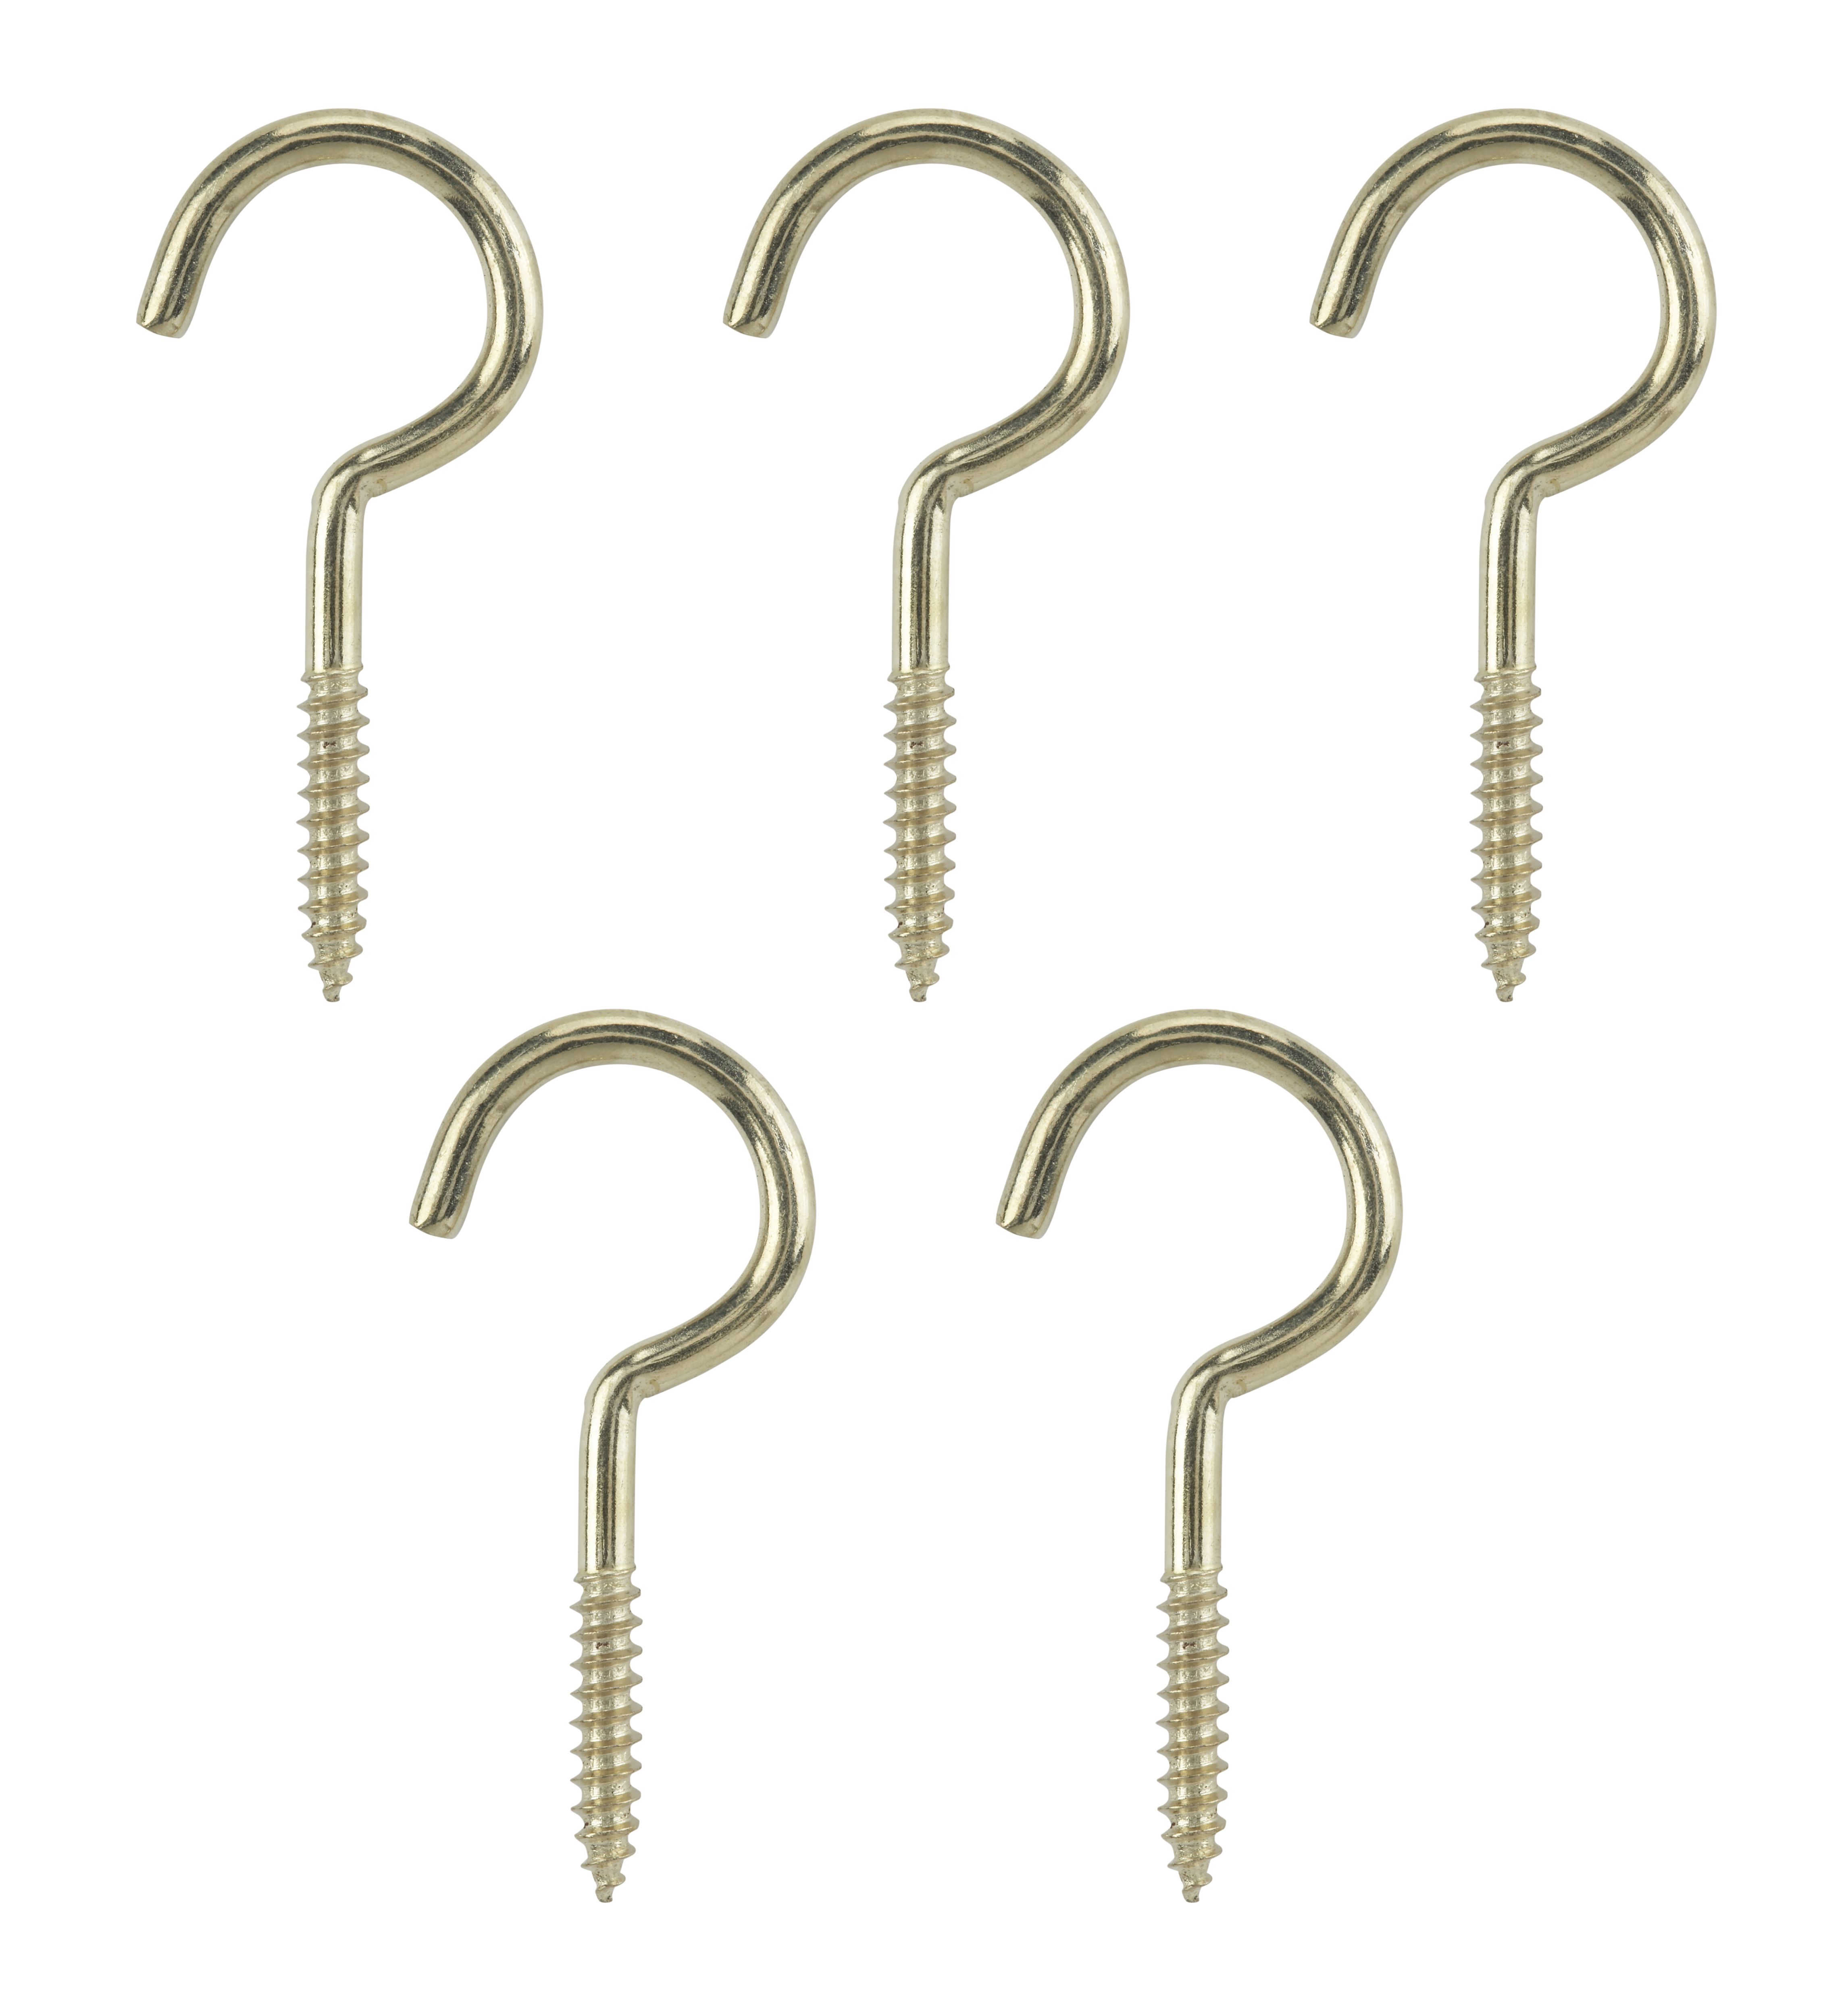 https://media.diy.com/is/image/Kingfisher/brass-plated-small-cup-hook-l-48mm-pack-of-10~05066193_10c?$MOB_PREV$&$width=768&$height=768